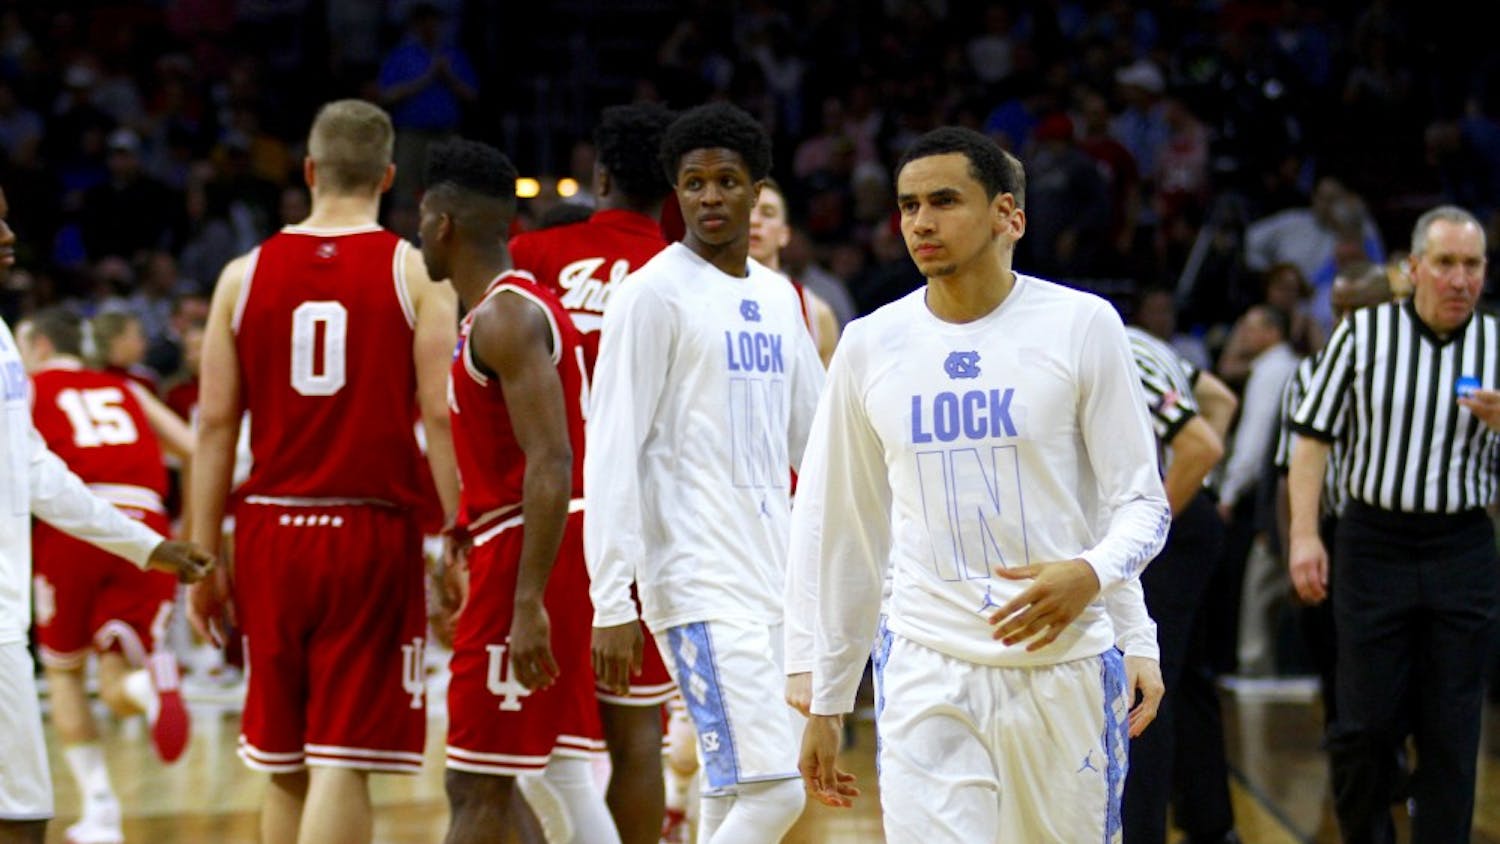 Marcus Paige warms up with the team before the start of the second half.